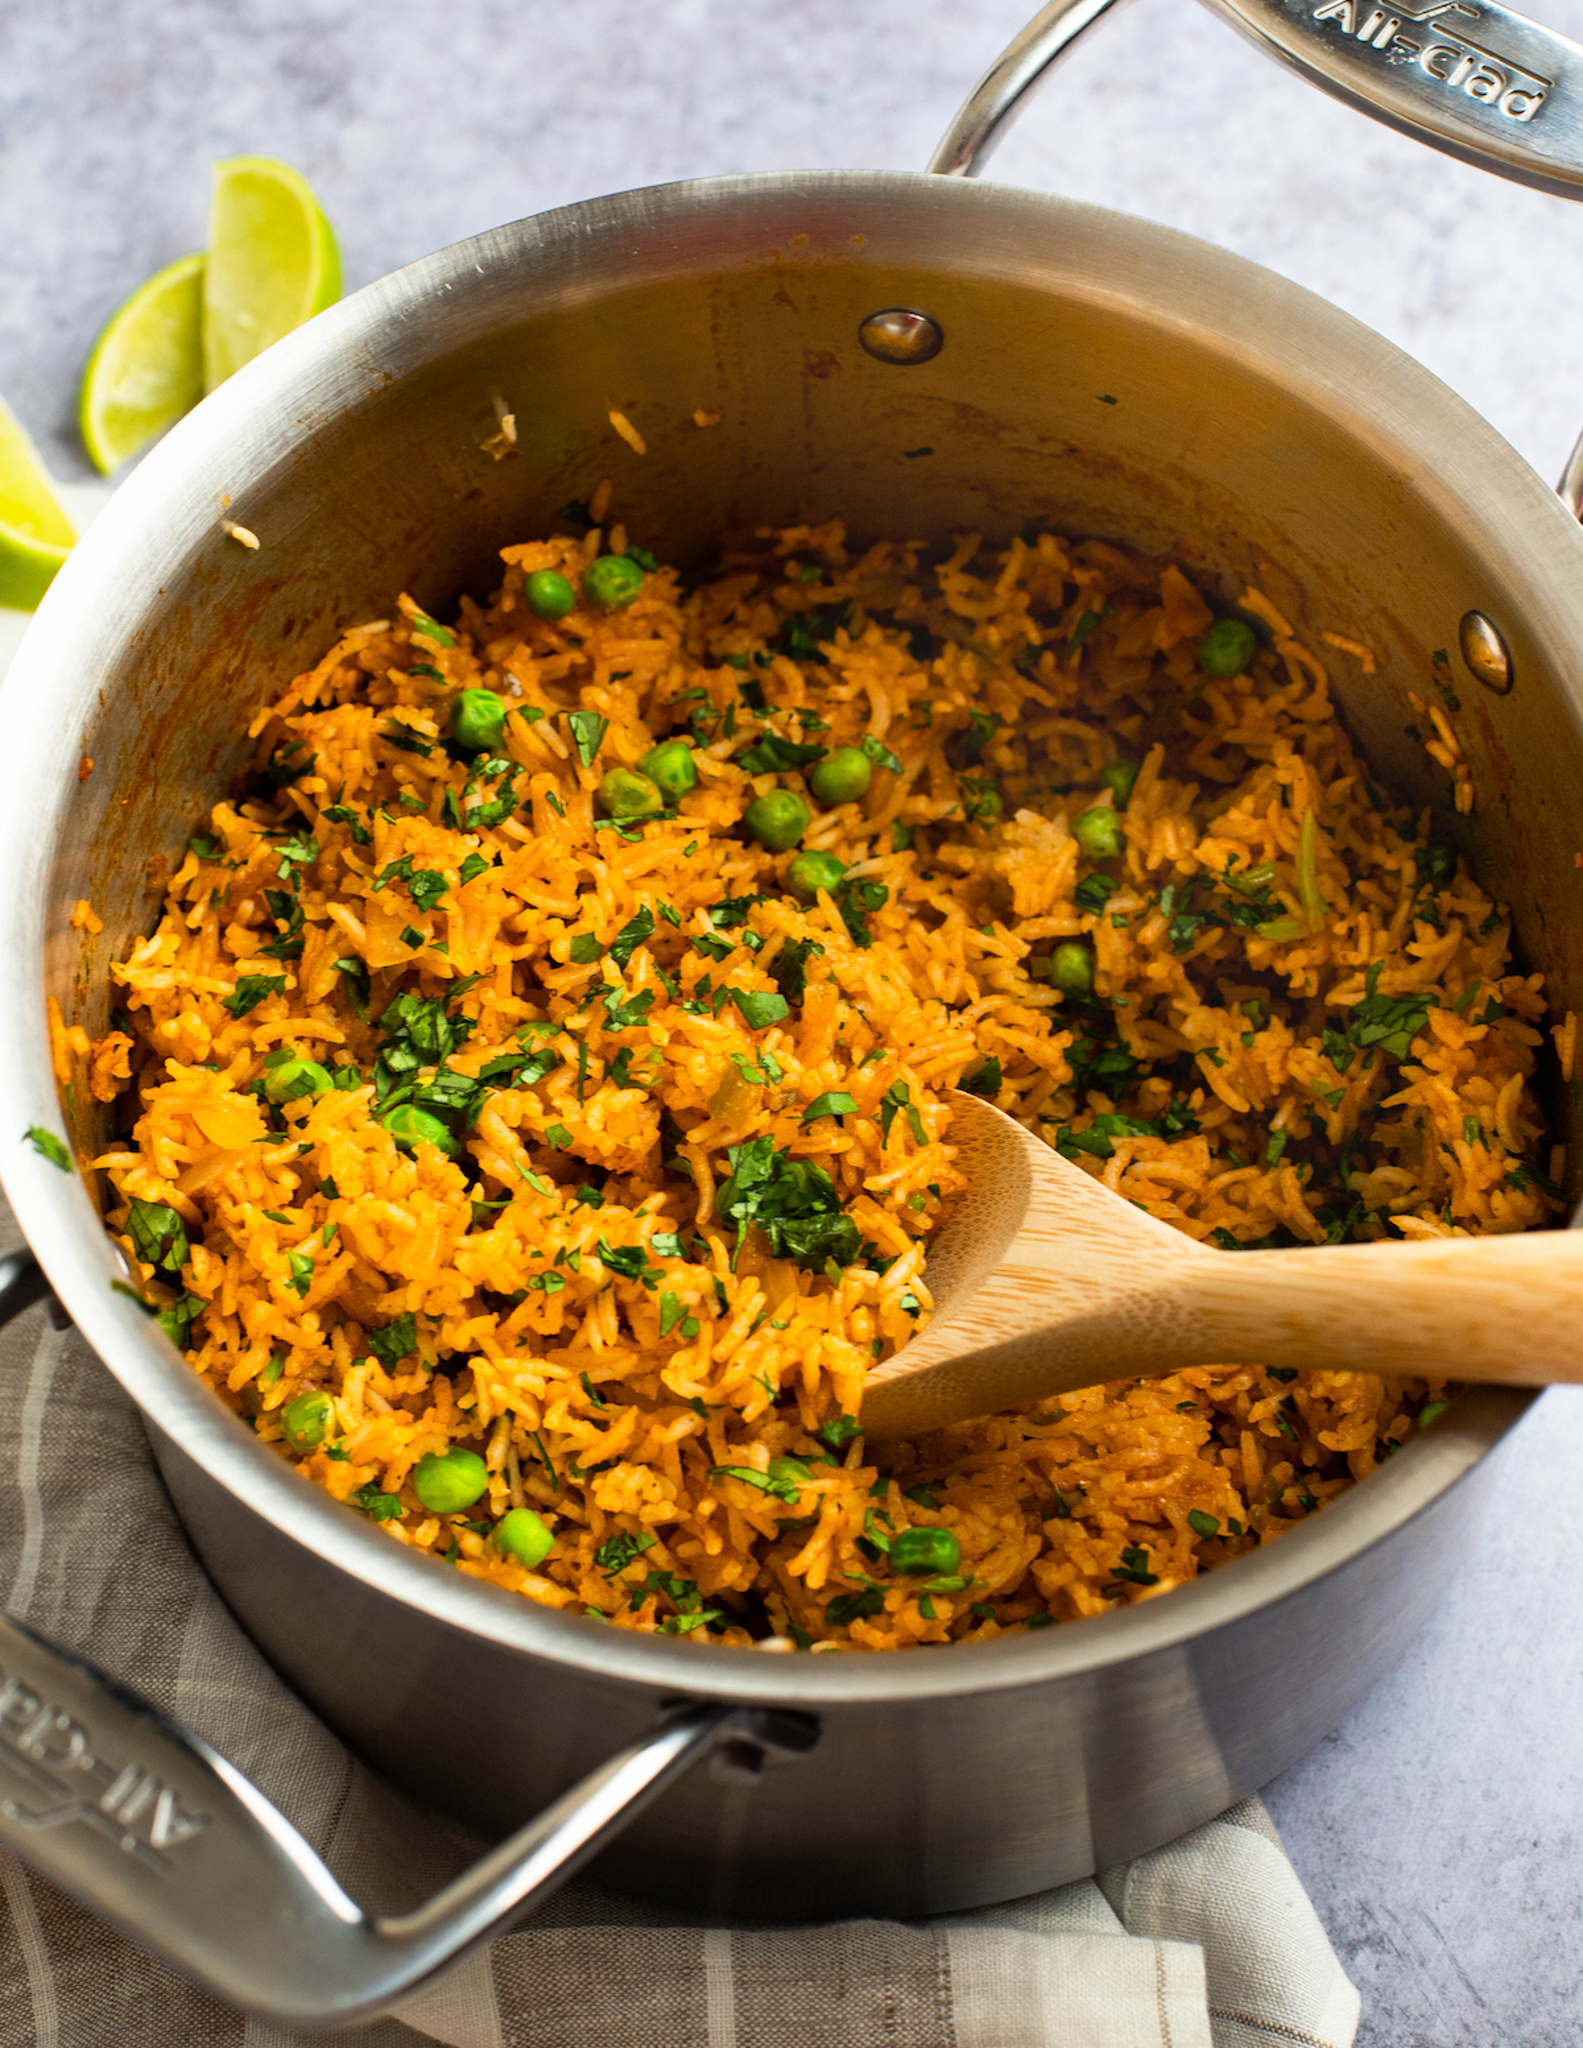 https://www.onceuponachef.com/images/2020/02/Mexican-Rice.jpg